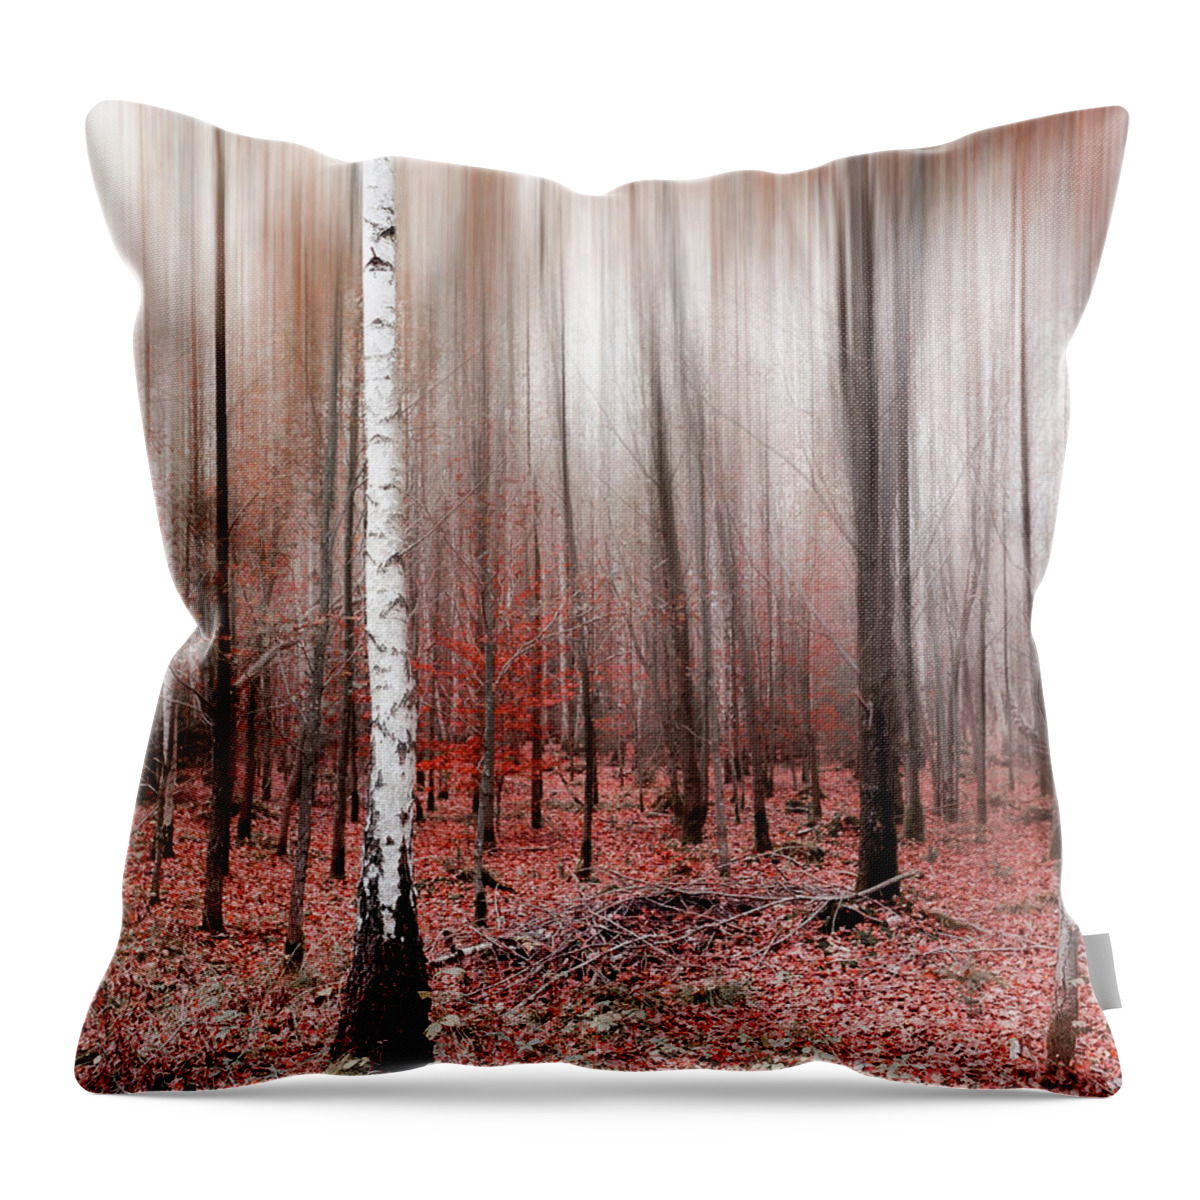 Abstract Throw Pillow featuring the photograph Birchforest In Fall by Hannes Cmarits